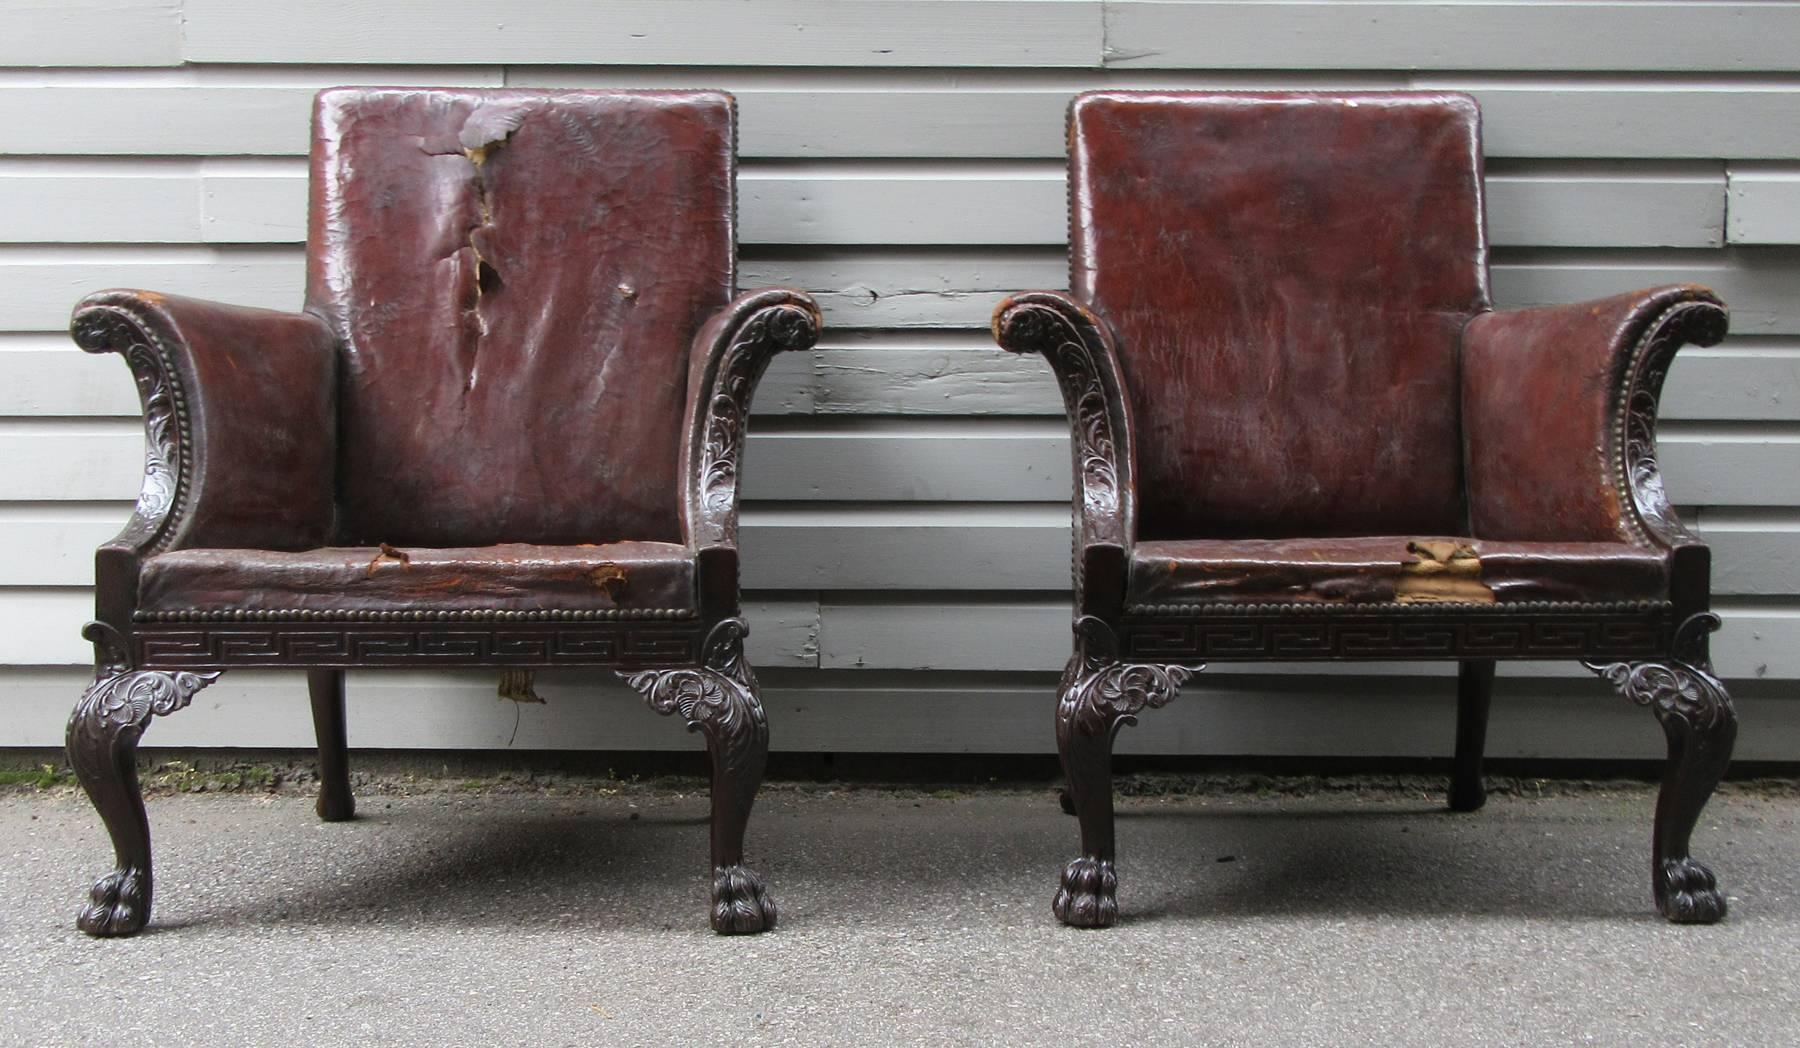 A stately pair of large Irish Chippendale mahogany library chairs, made in the late 18th-early 19th century, with intricately carved frames featuring acanthus leaves, rosettes and hairy paw feet. The frames are in excellent condition, however the